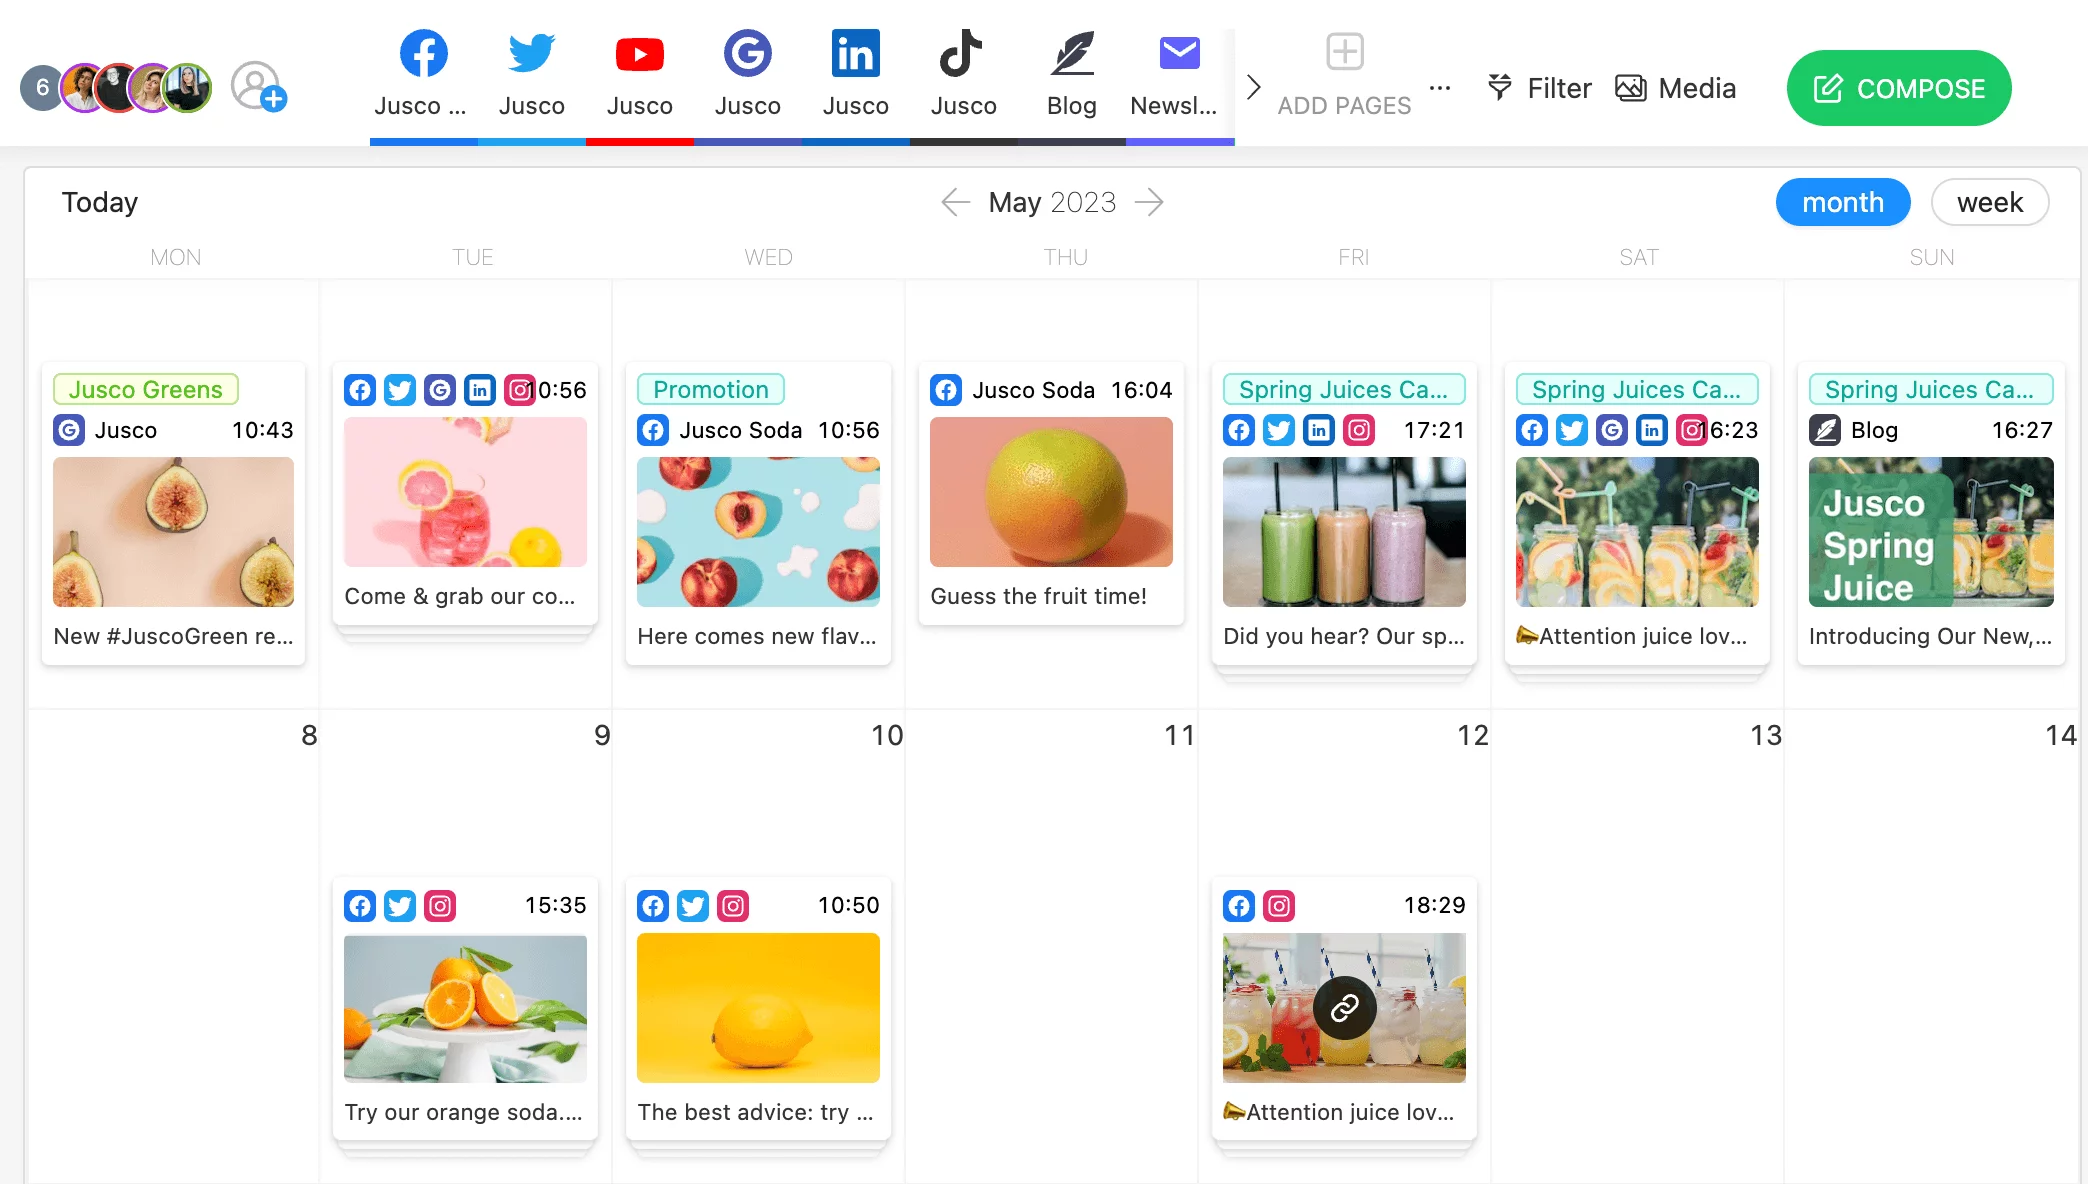 Screenshot showing a calendar view with multiple social media platforms and scheduled posts in Planable.